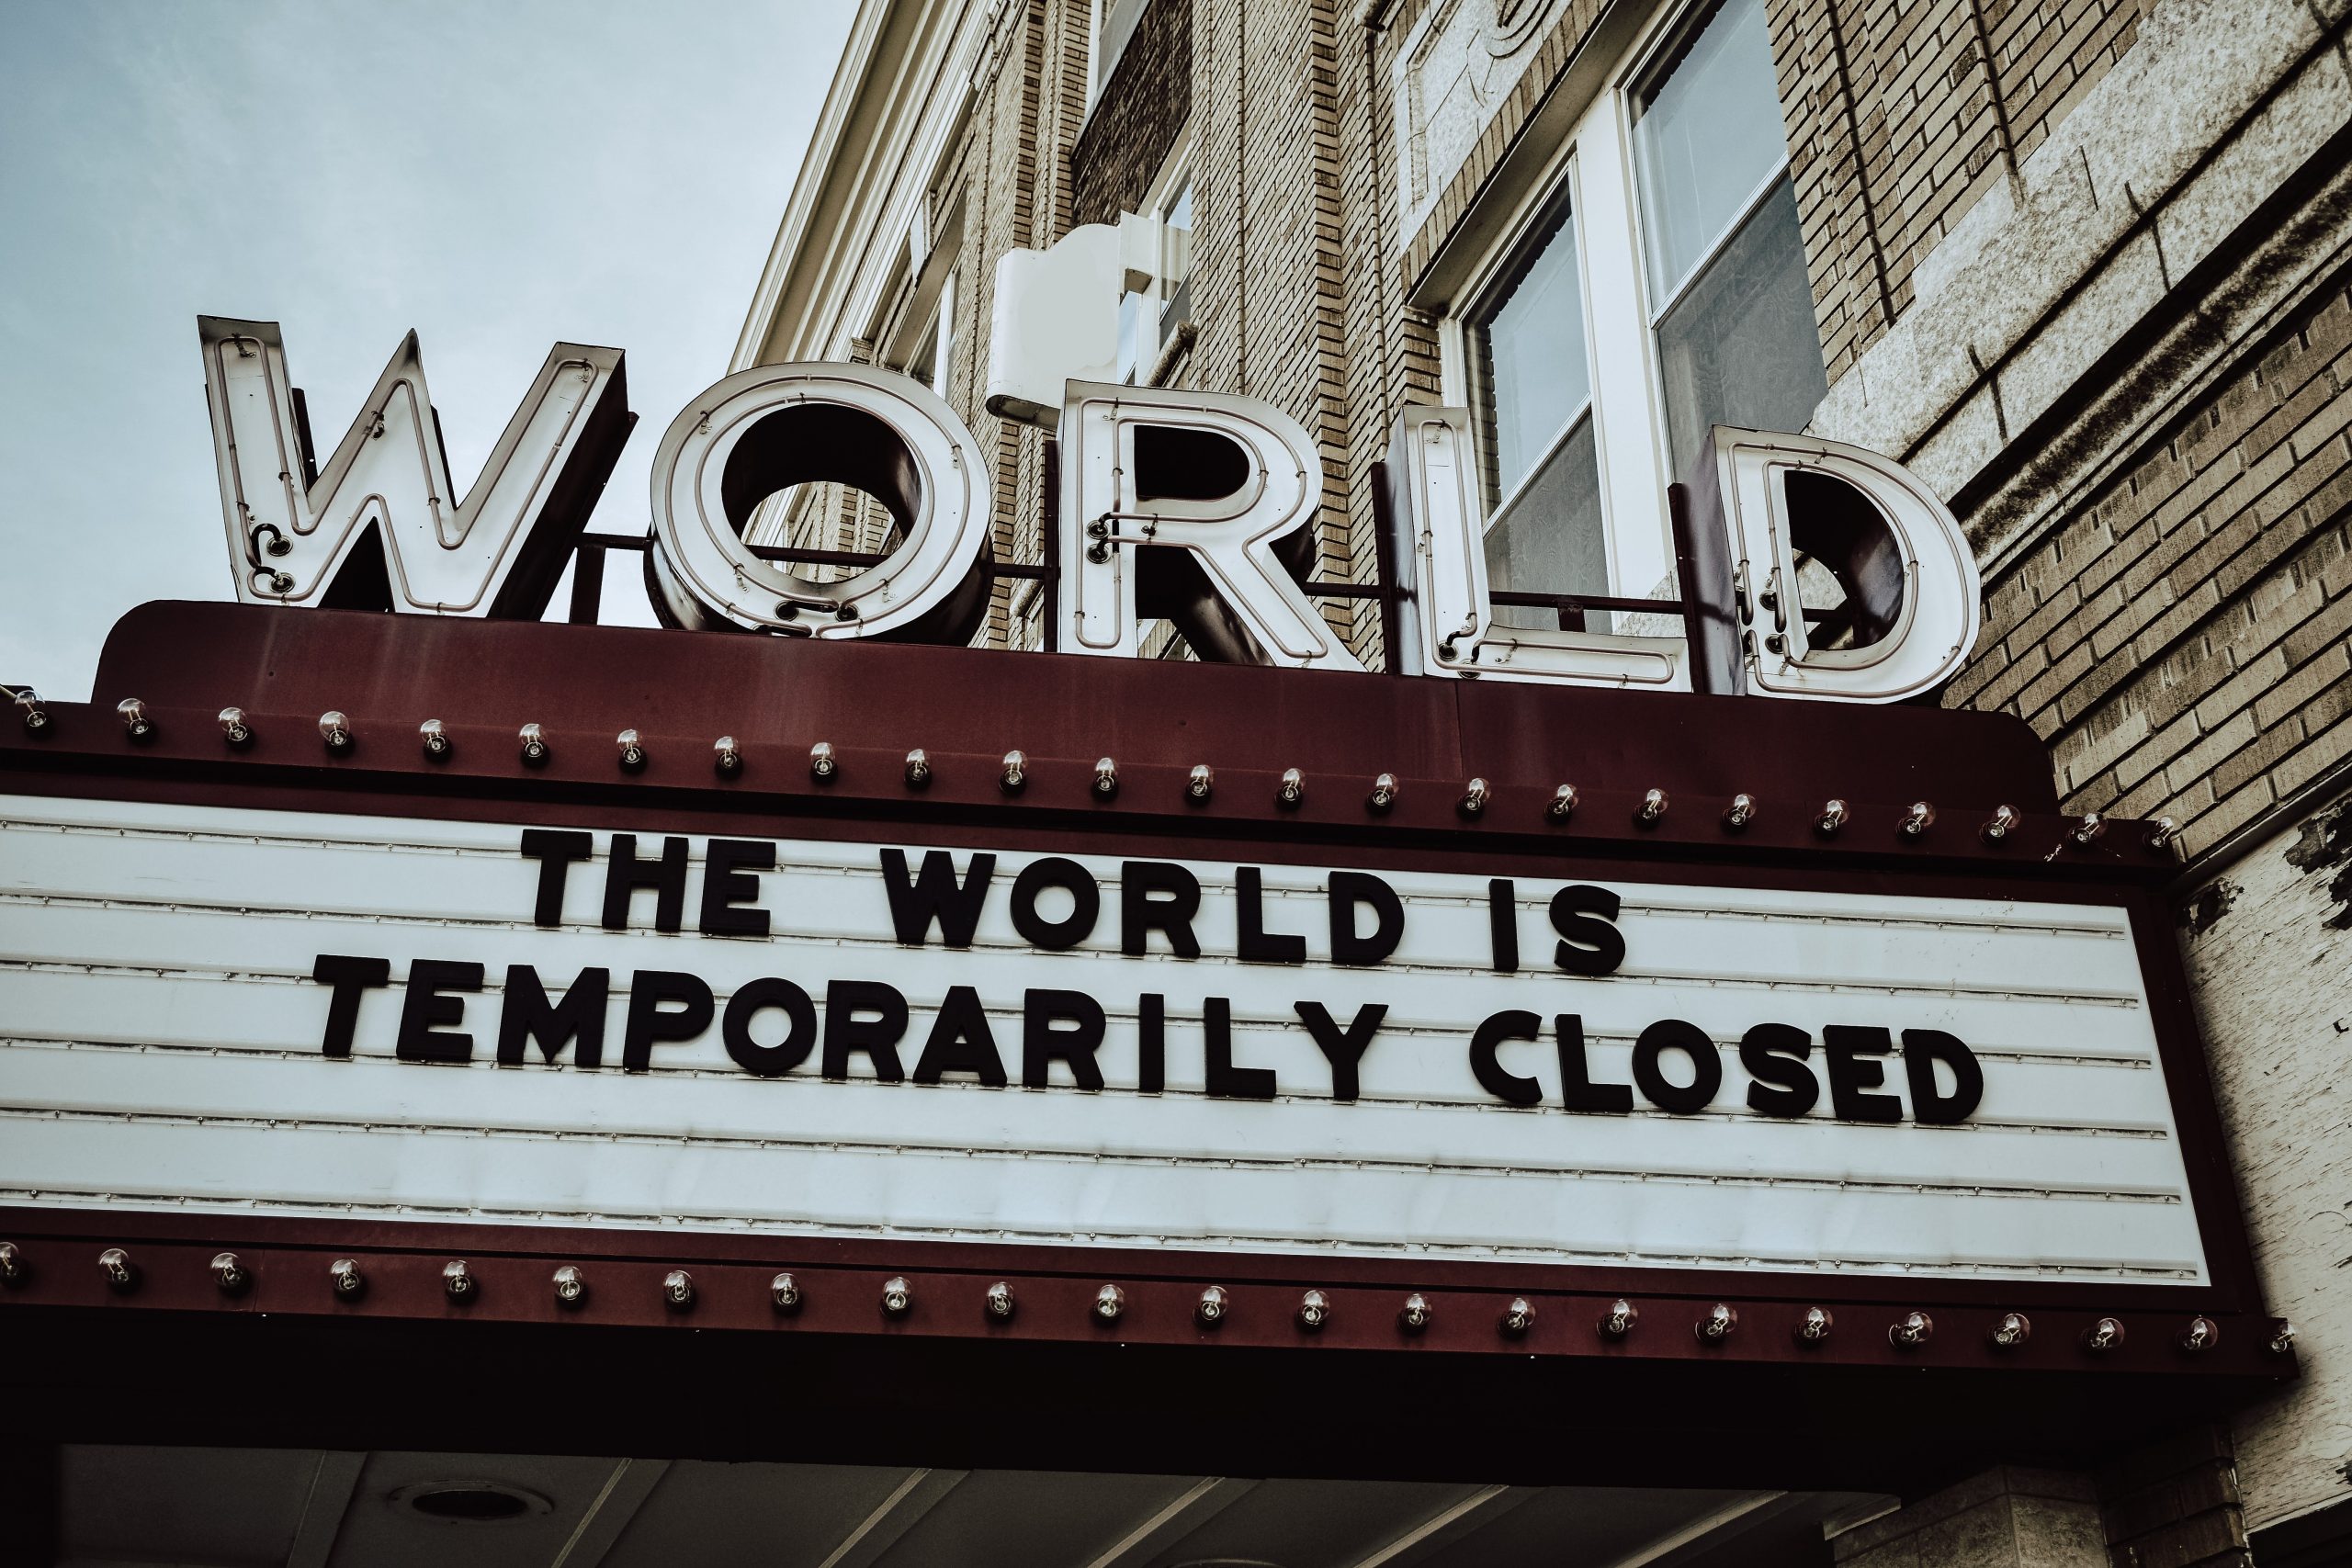 A sign on a theater called "WORLD" reads "The World is temporarily closed."